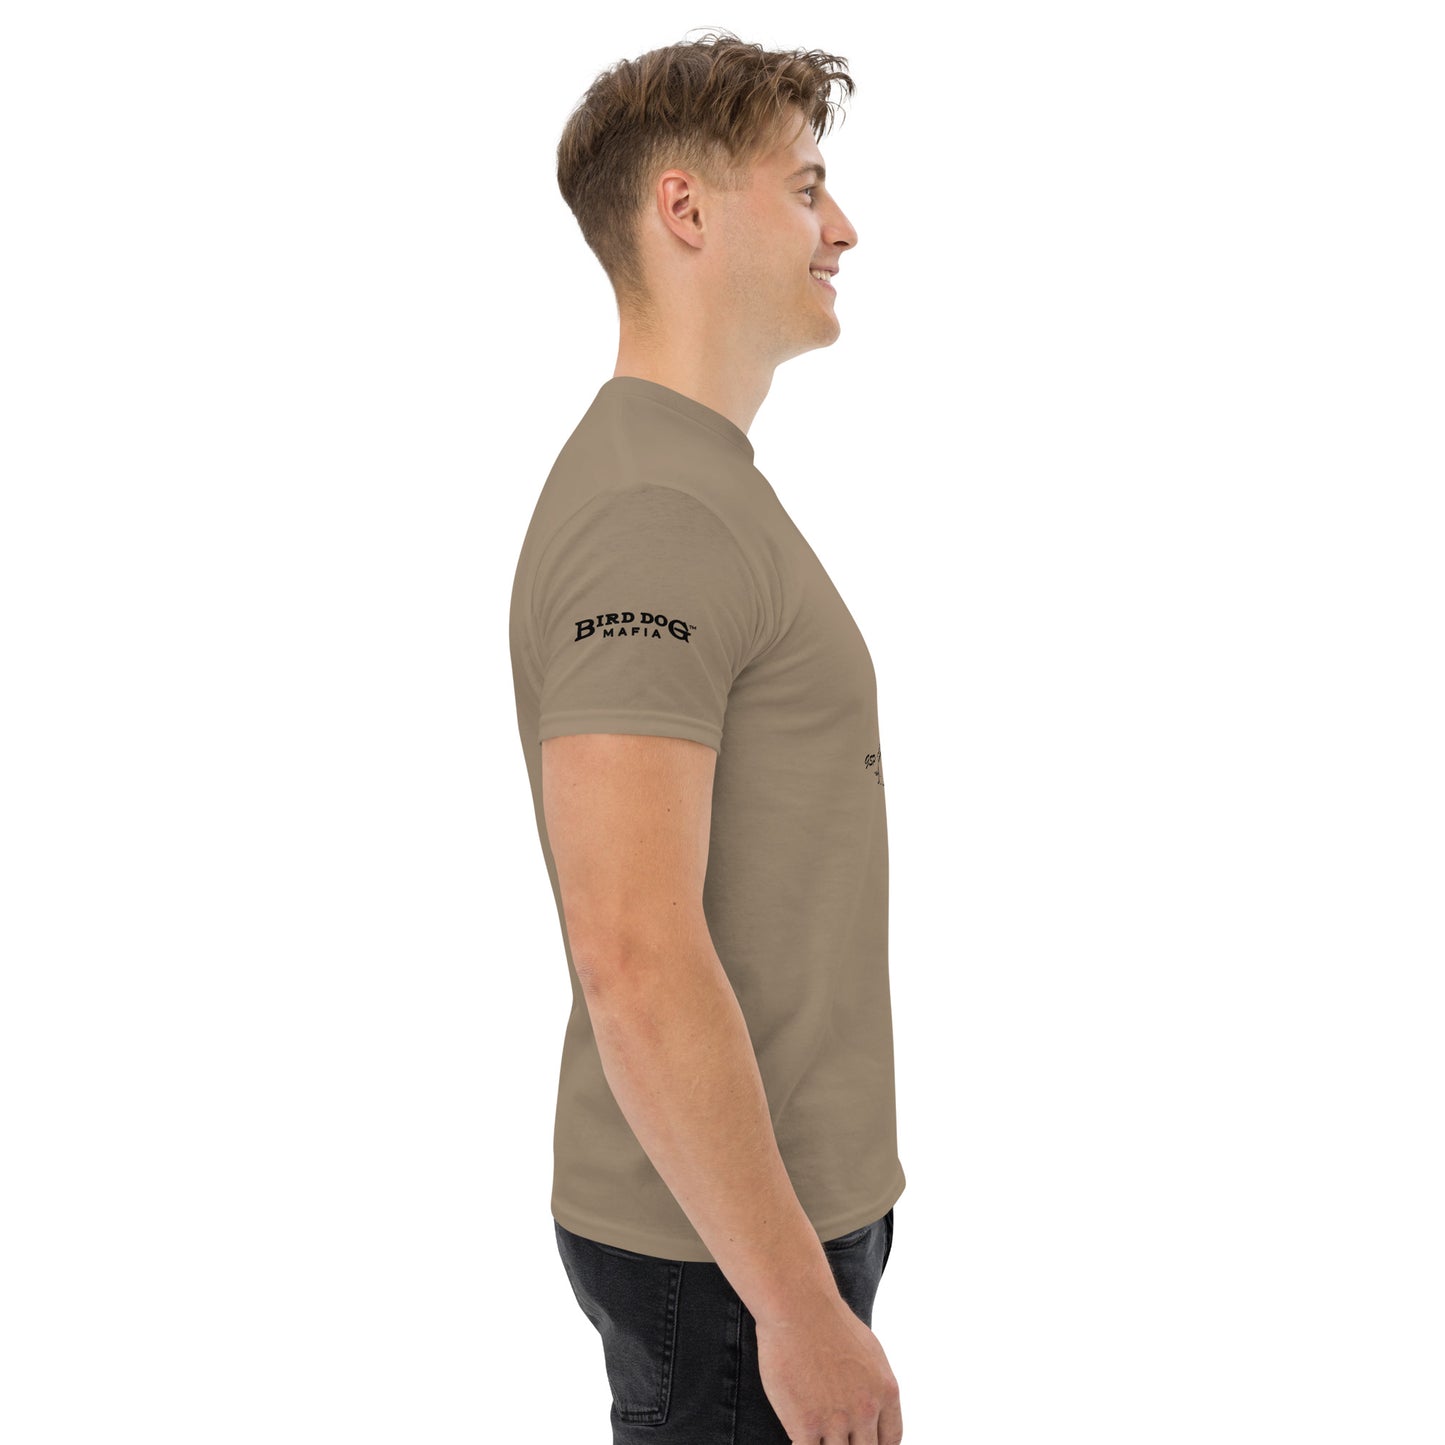 Get to the Point! Pointer T-Shirt